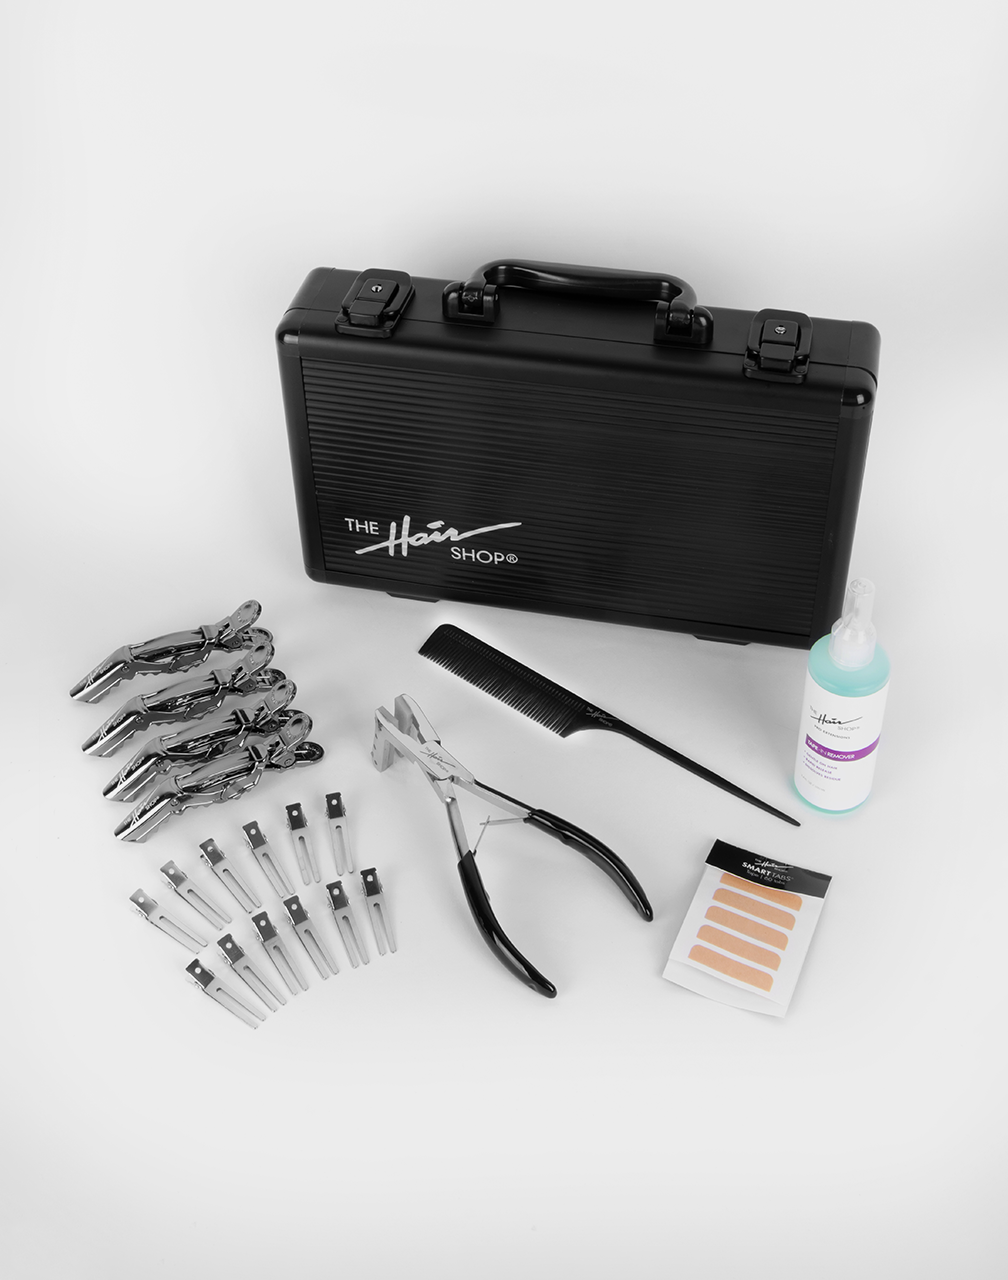 SMART TABS PRO KIT, Kit Contains: Pro Tape-In Press, Pin Tail Comb, Smart Tabs Tape, Tape-In Remover, Metallic Shark Clips 4 pack (gun metal), Duckbill Clip pack, Protective case